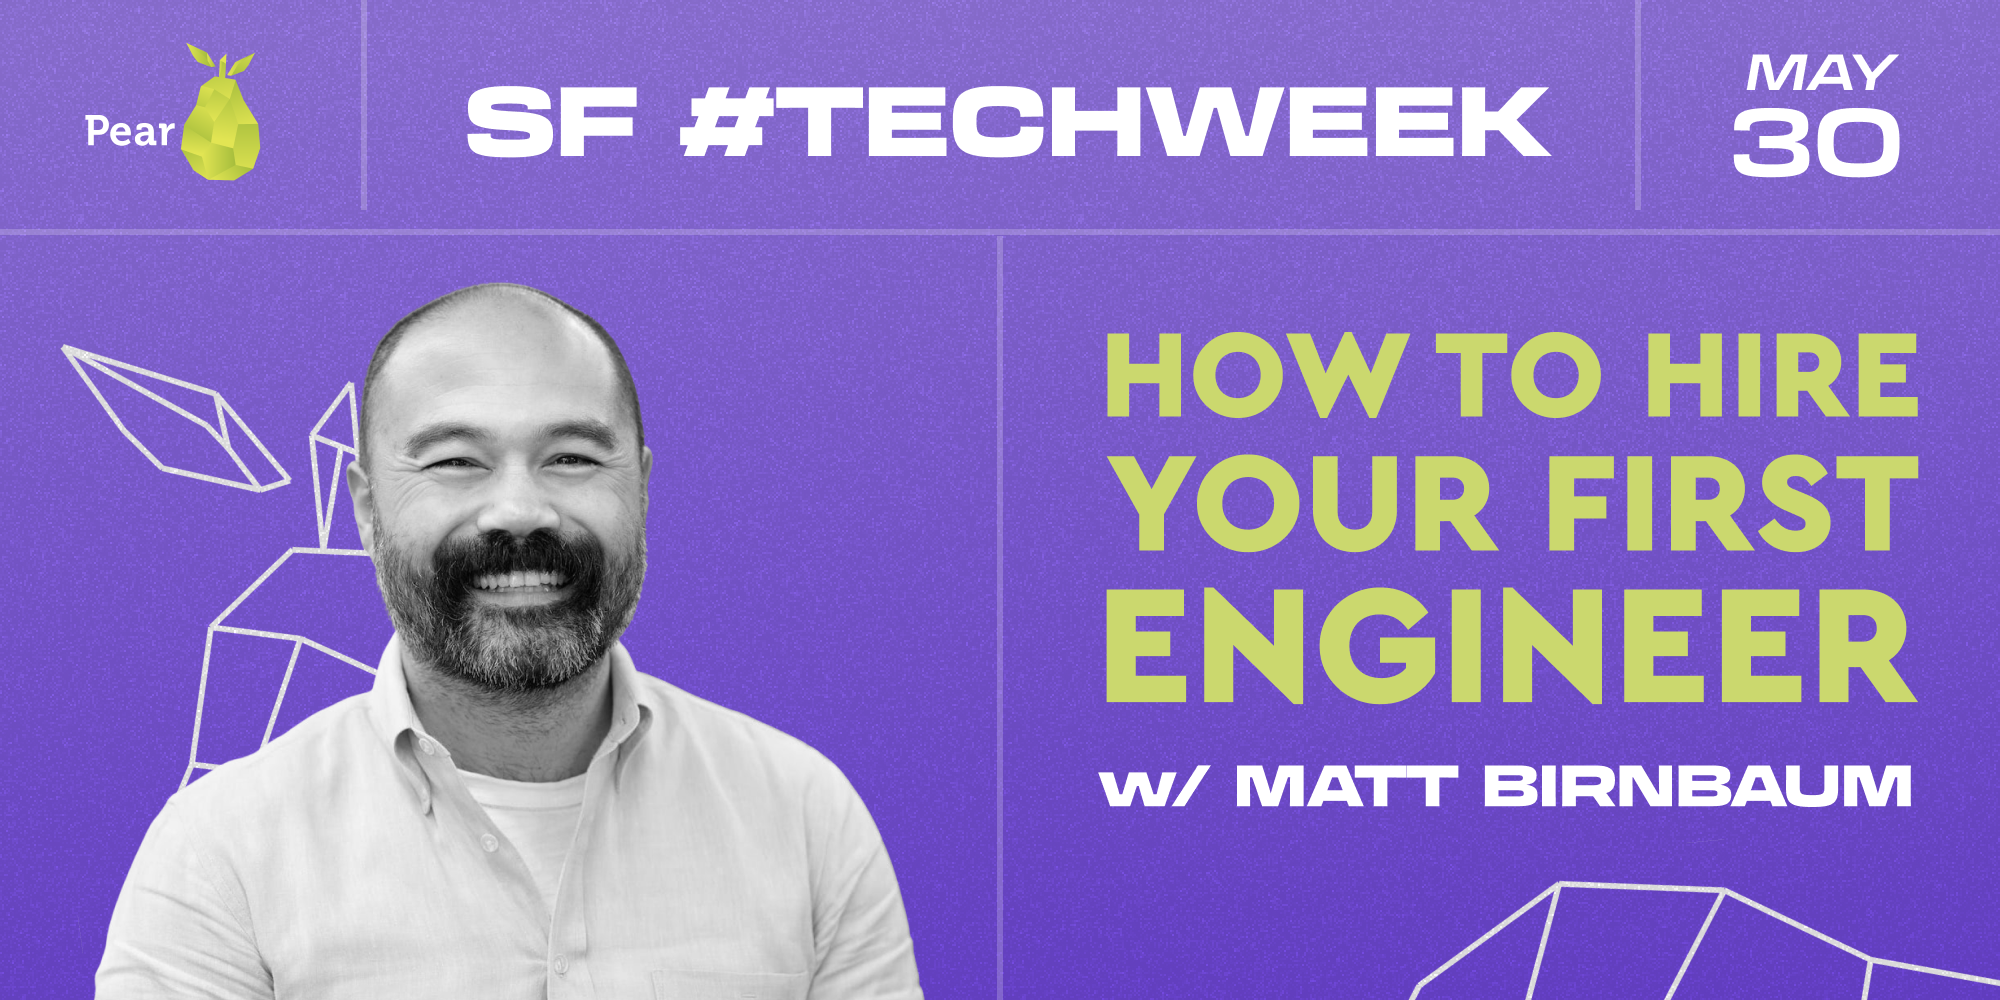 event SF #TechWeek x Pear VC: How to hire your first engineer with Matt Birnbaum, Talent Partner at Pear VC